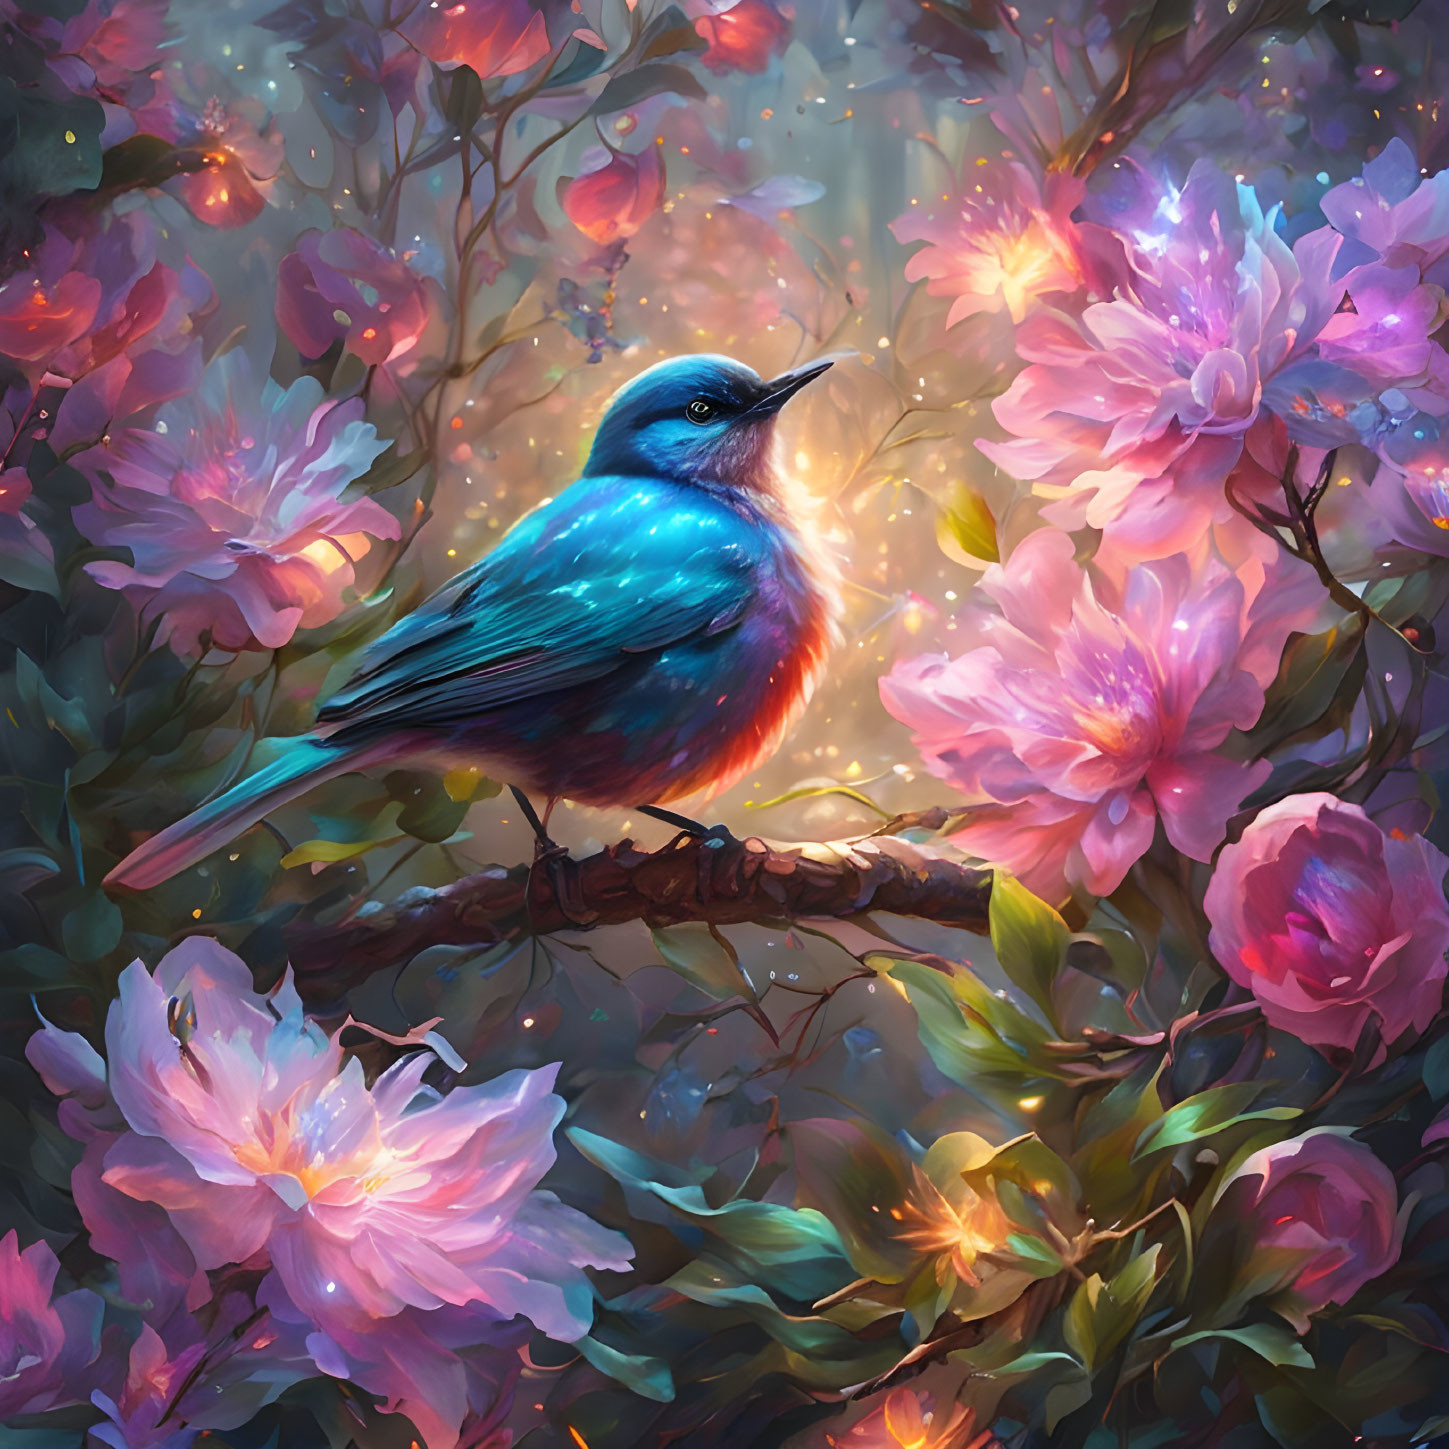 Bird and Magical Flowers